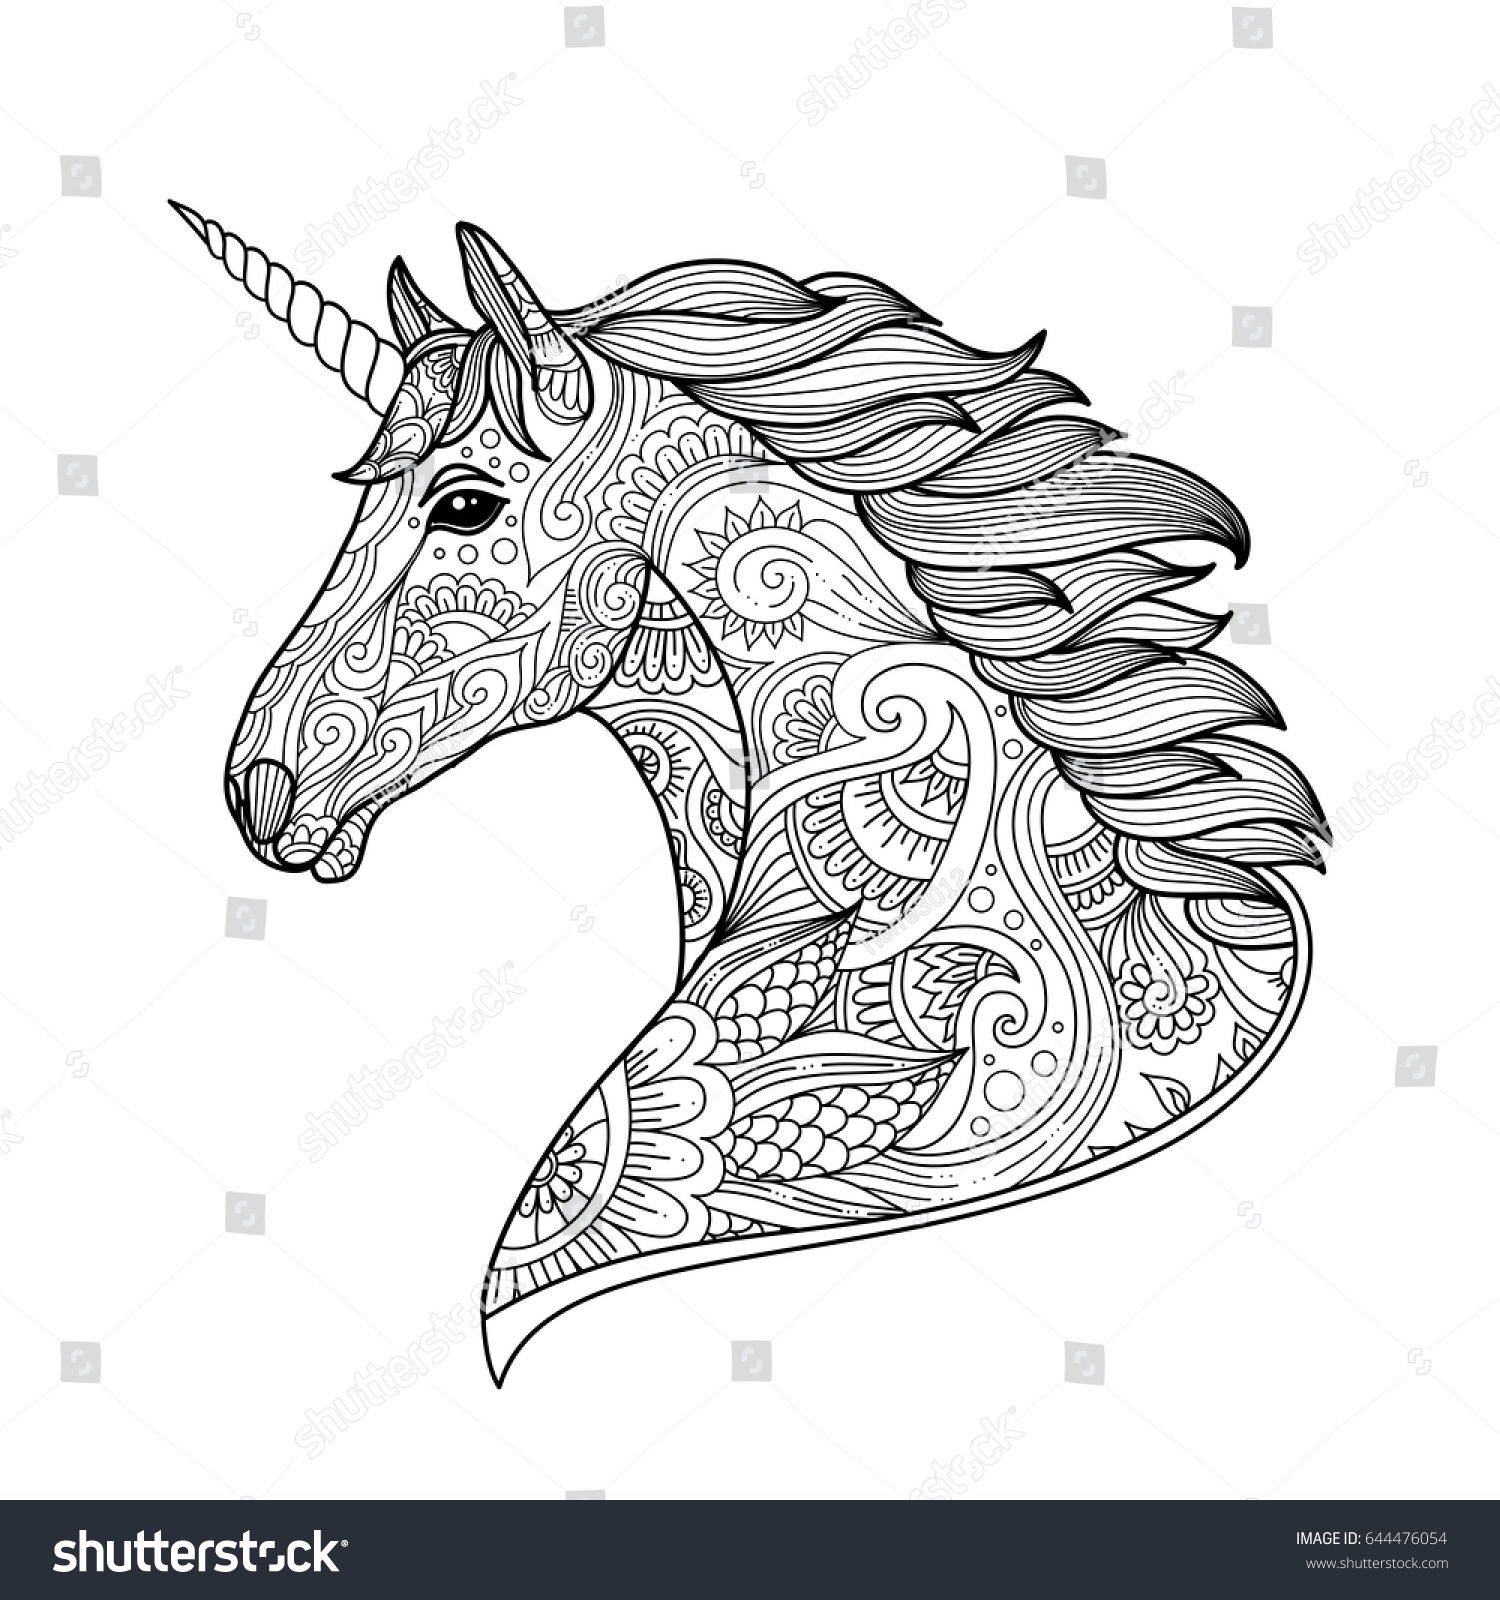 Drawing Unicorn Zentangle Style Coloring Book Stock Vector ...